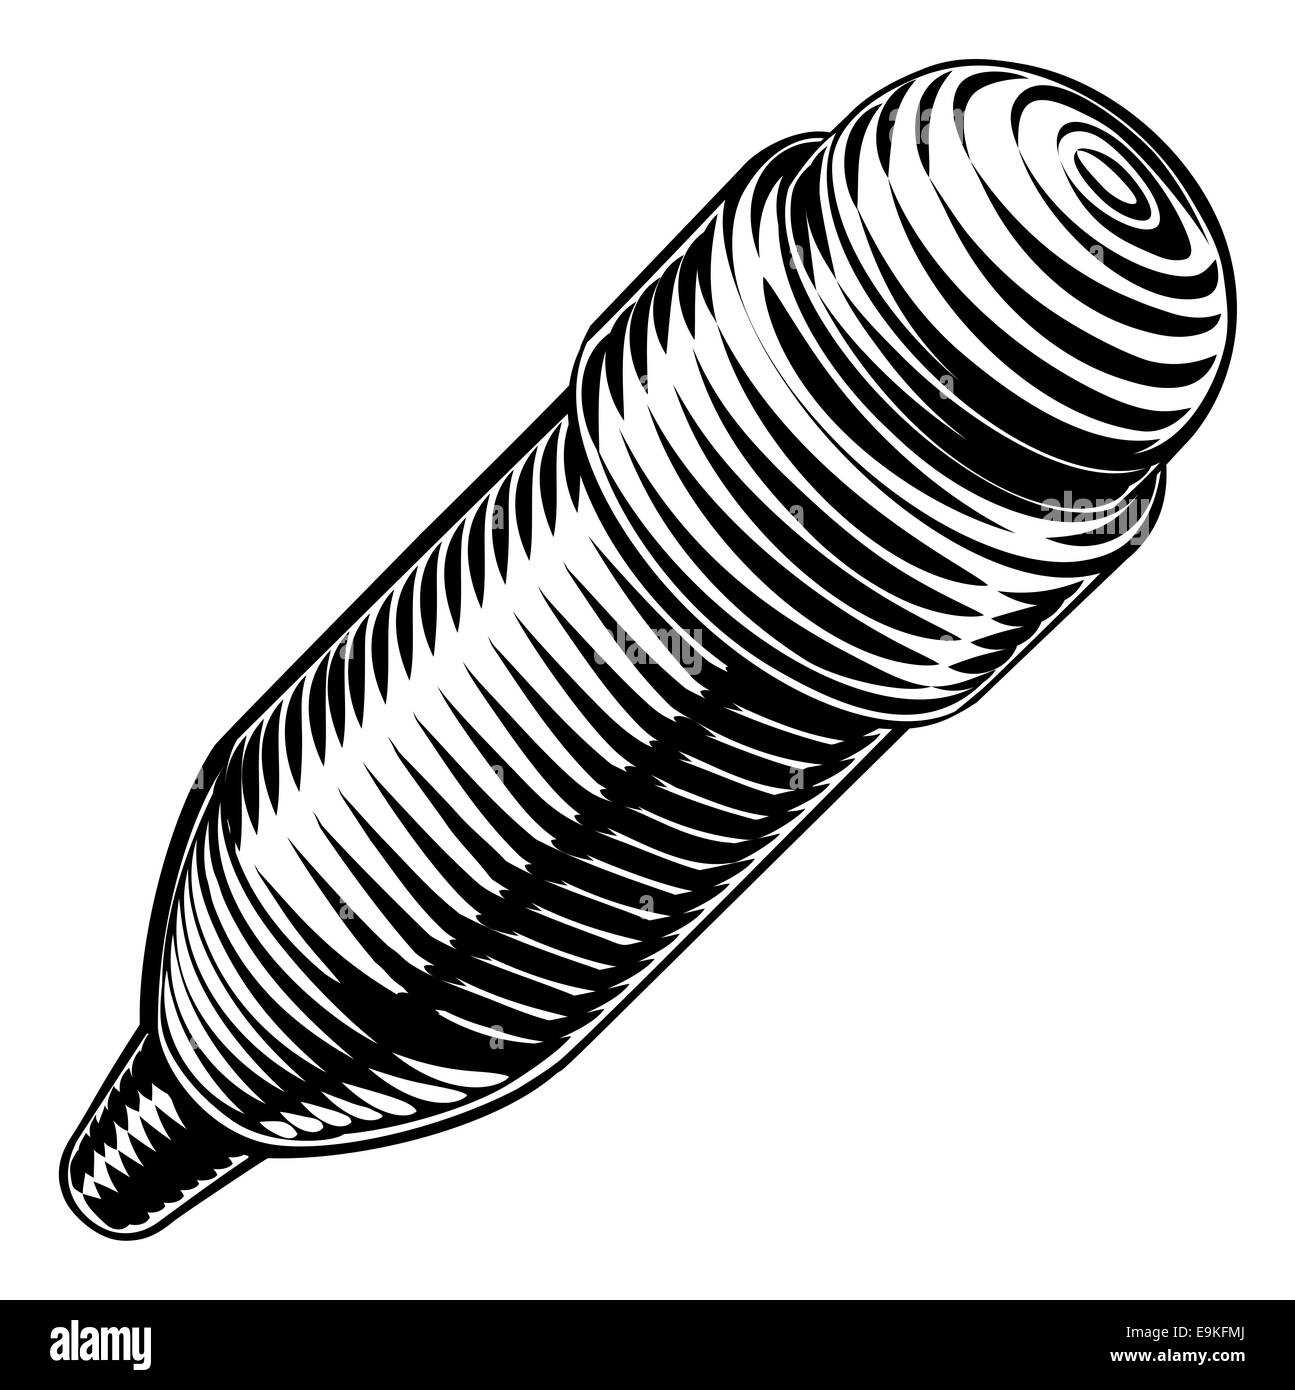 A an original illustration of a vintage woodcut style pencil icon Stock Photo